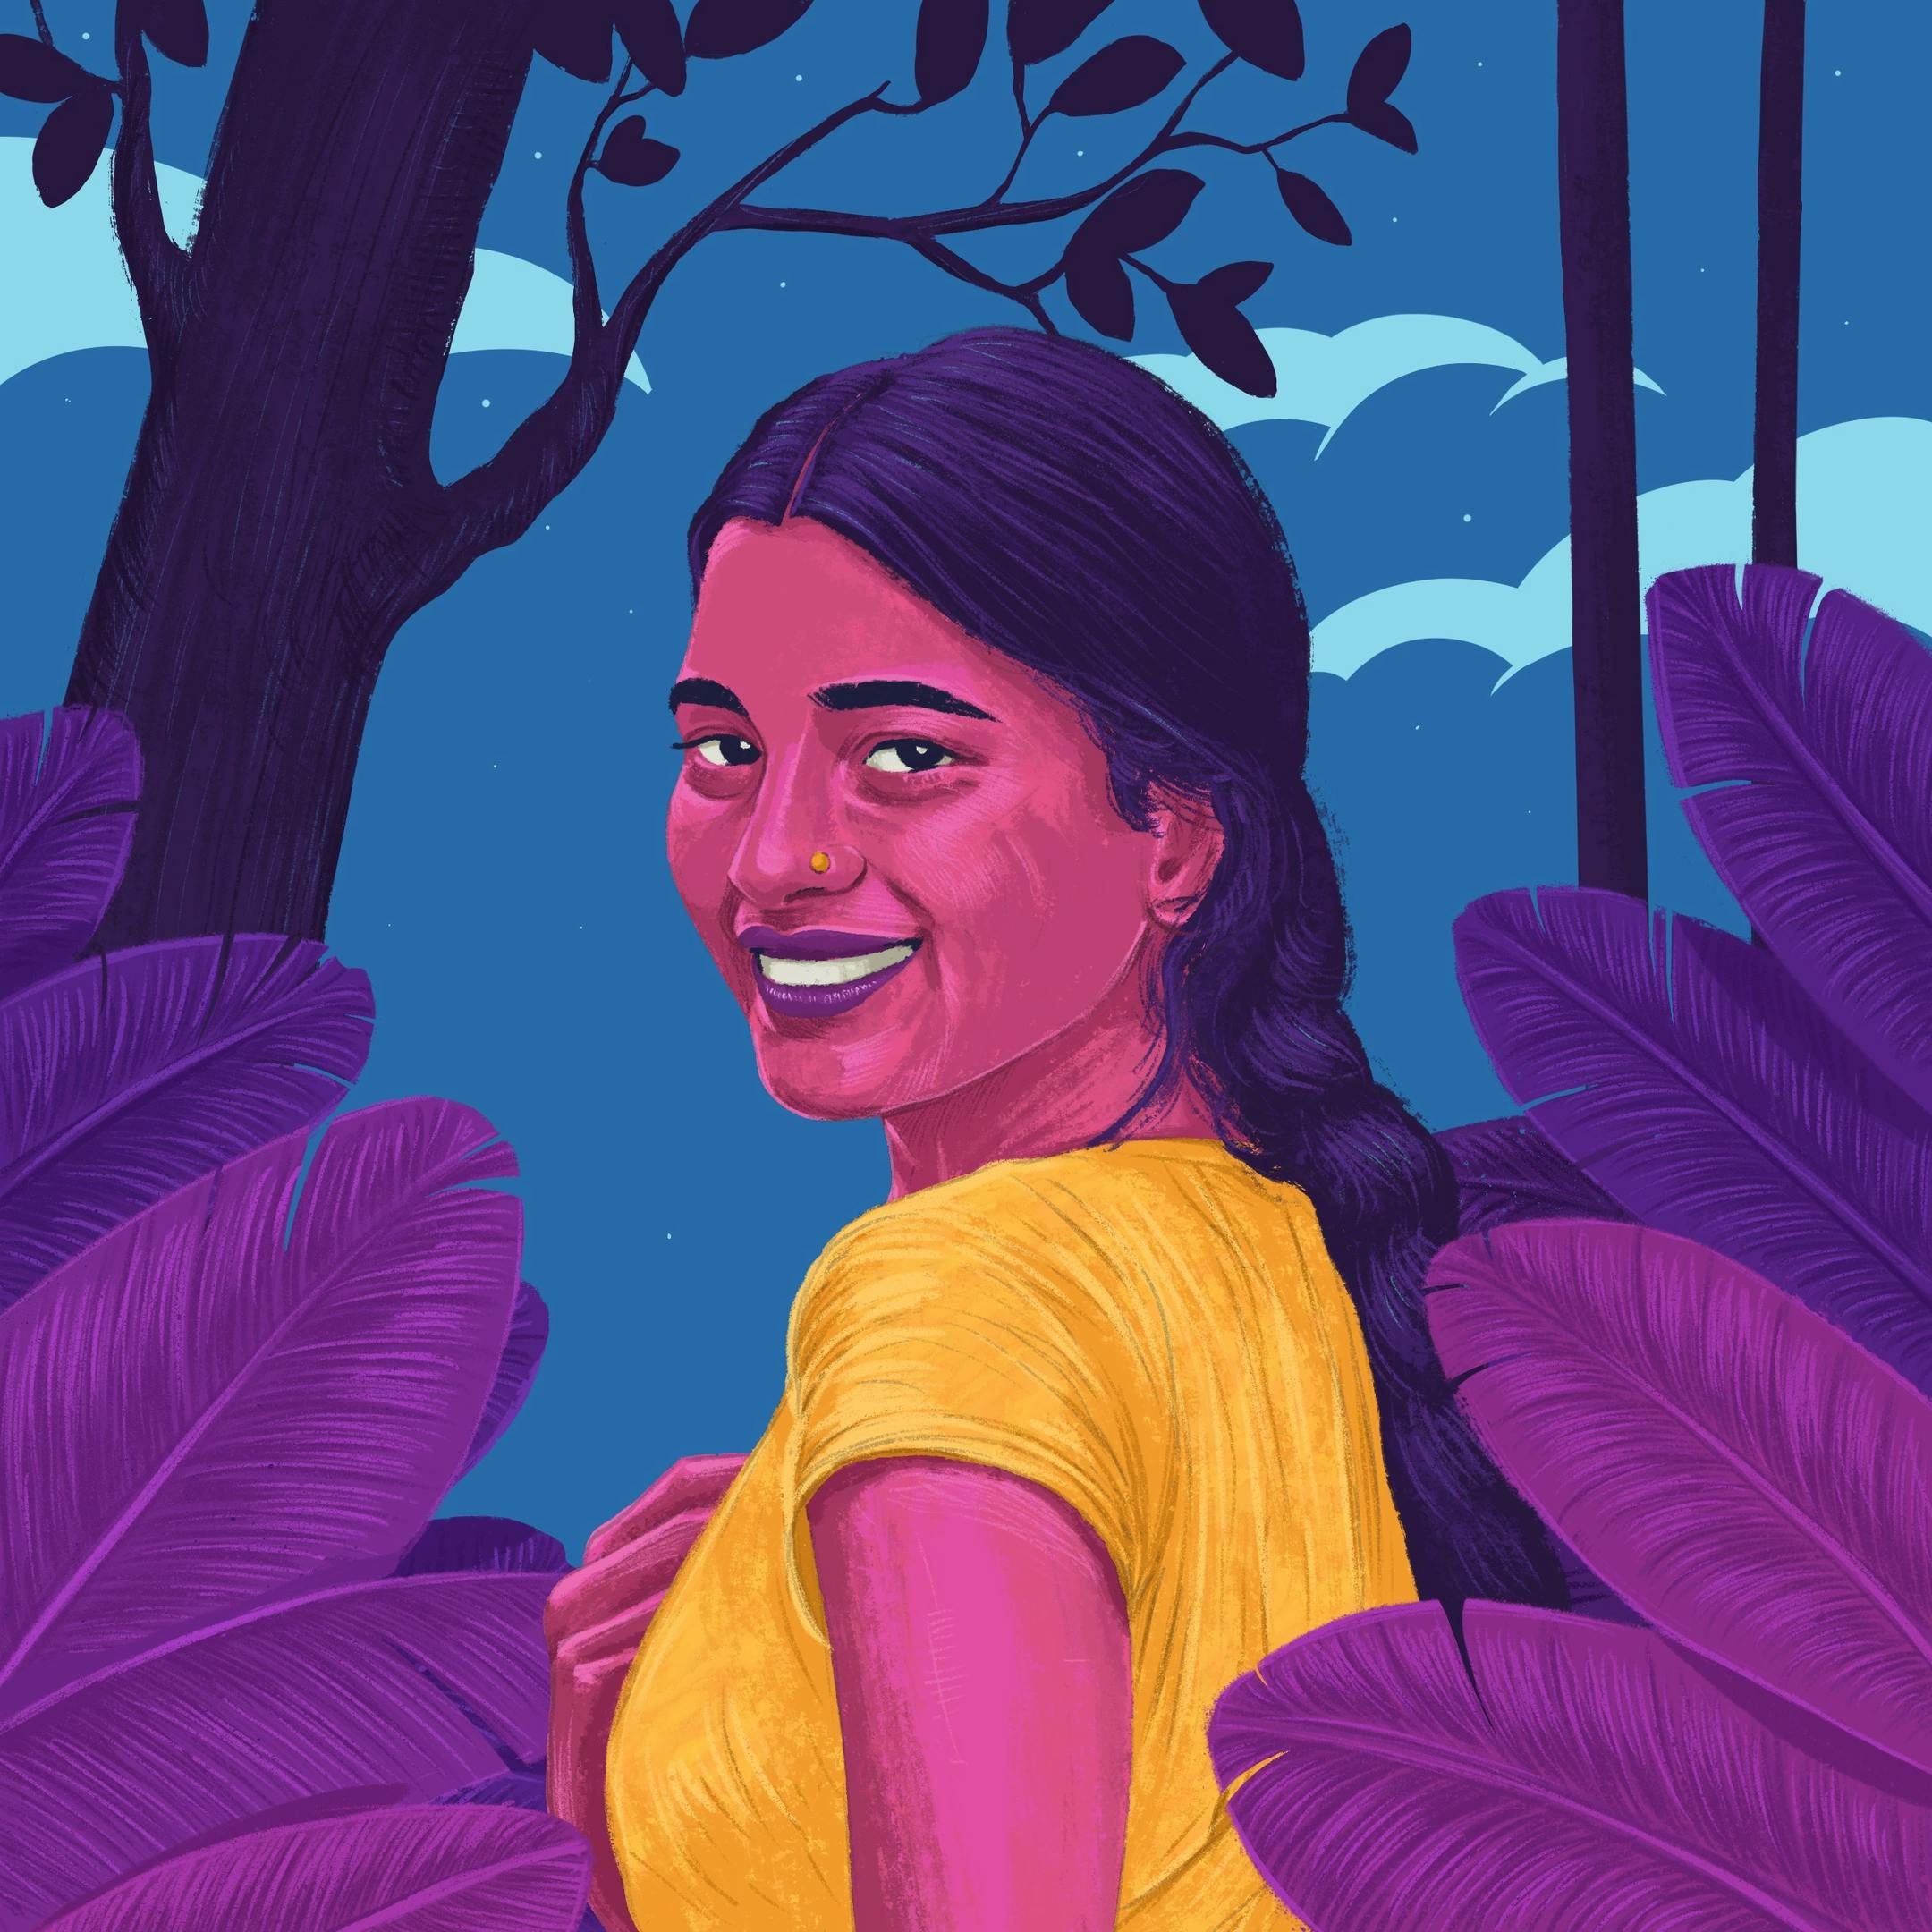 A smiling woman in the bushes